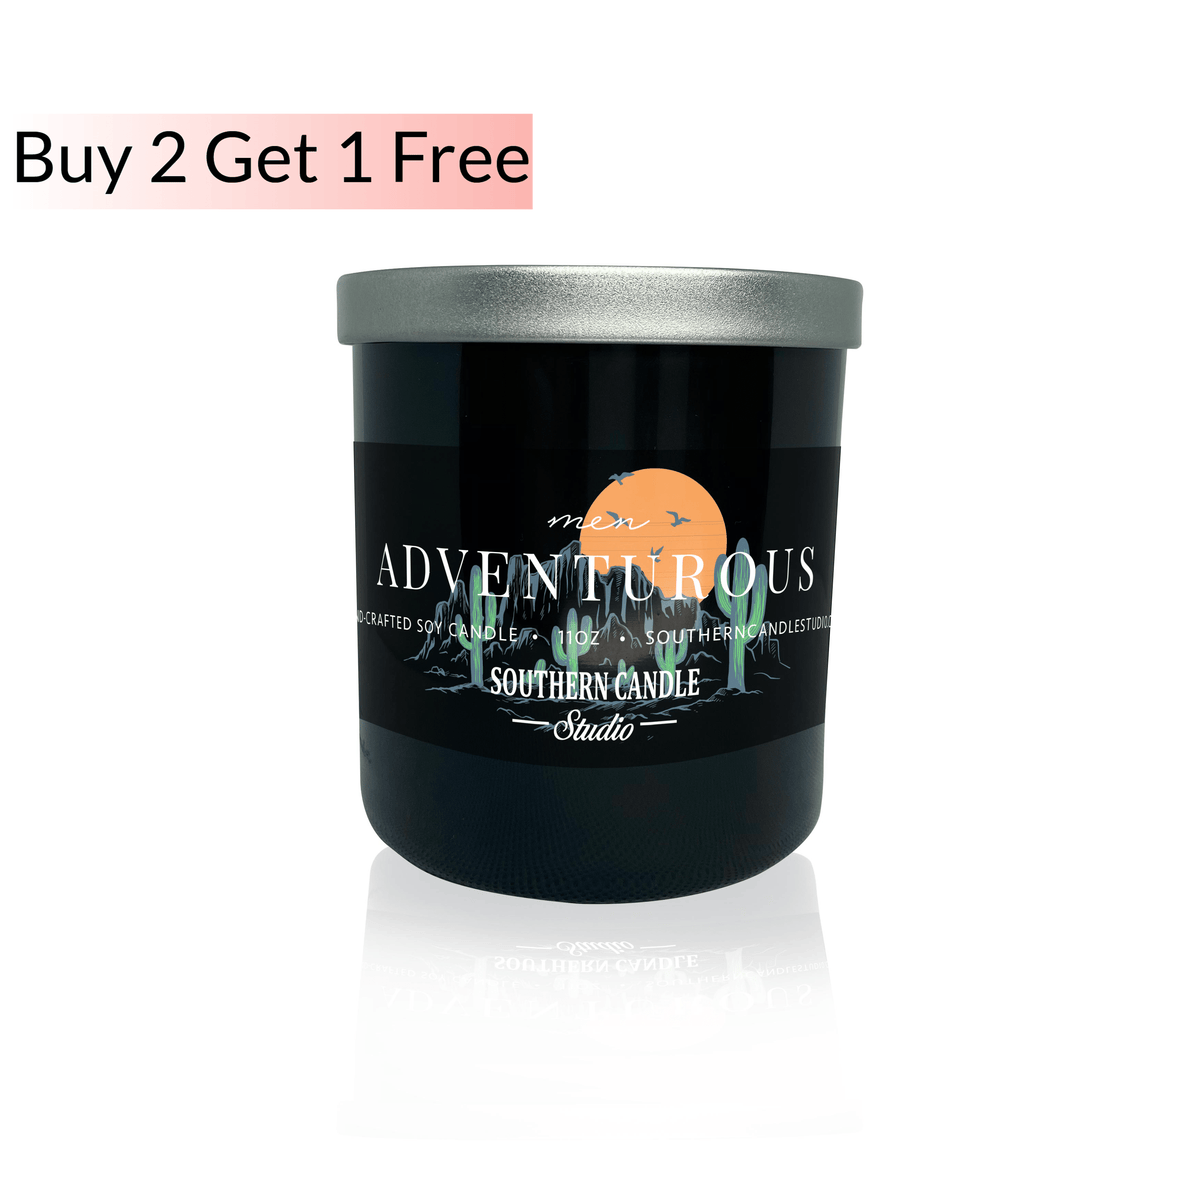 Myrtle Beach Soy Wax Candle 11 oz.– Southern Candle Studio